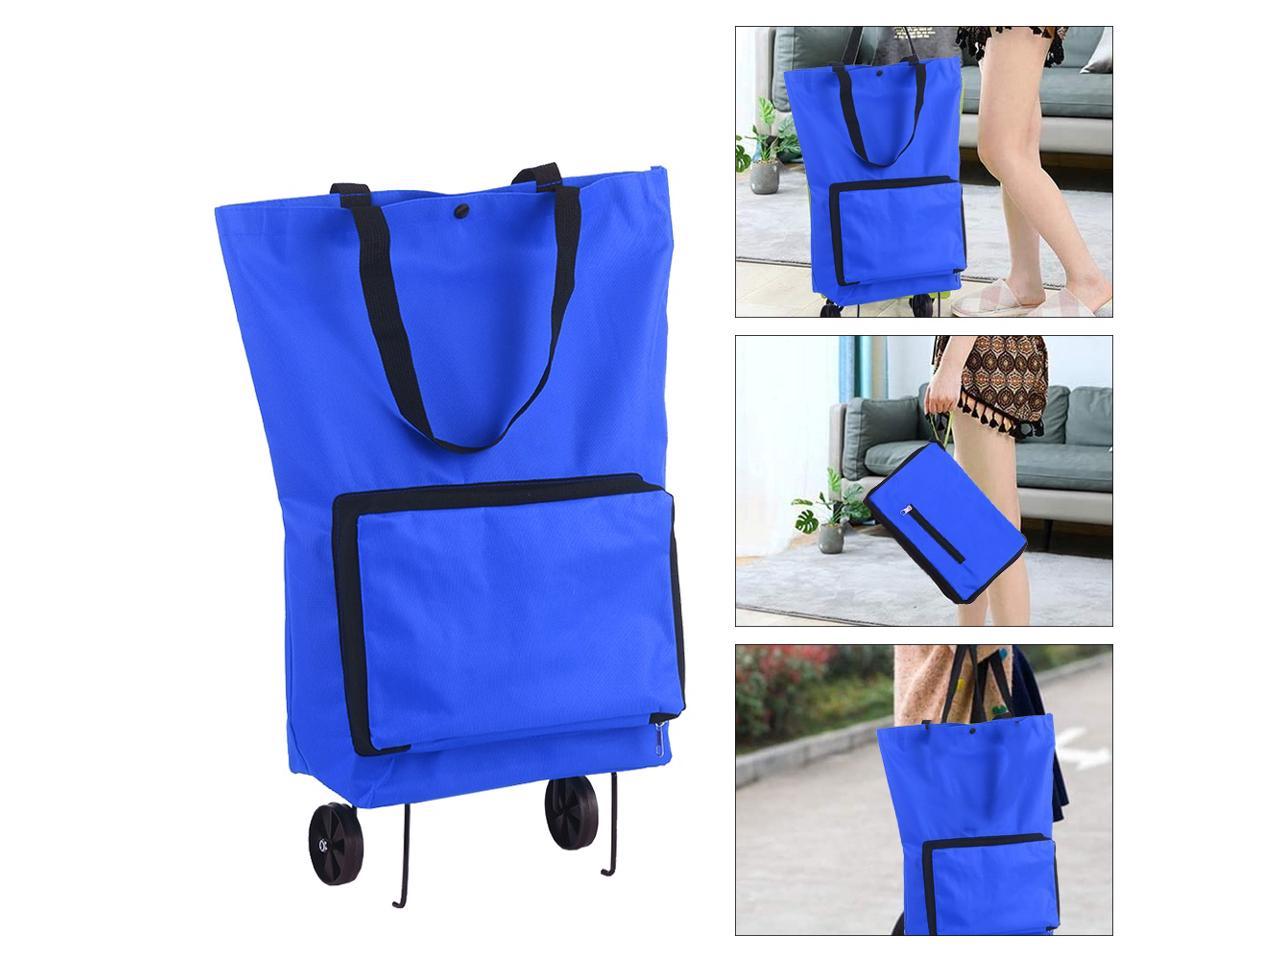 Expandable Shopping Trolley Bags/Totes Pack of 4 